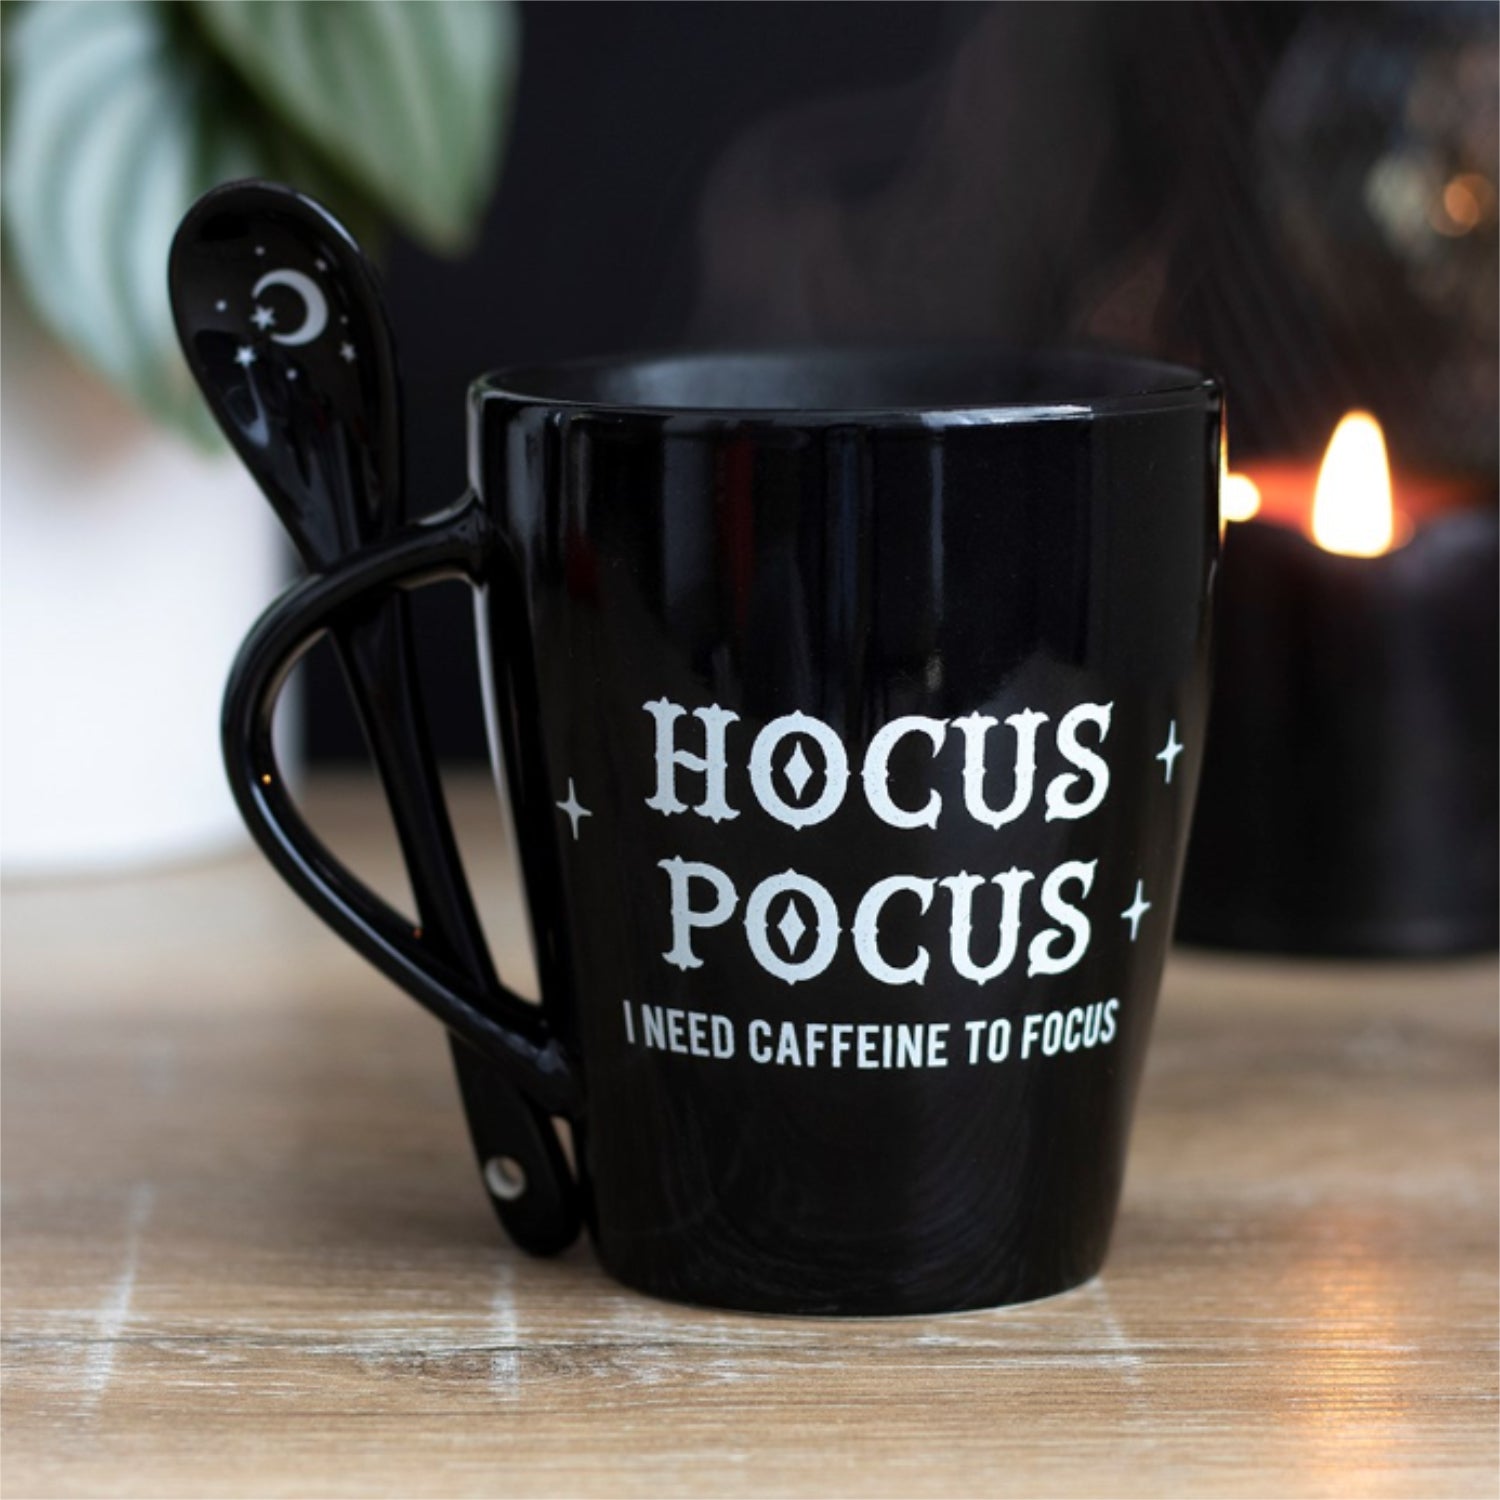 Hocus Pocus Cup and Spoon Set - 13 Moons